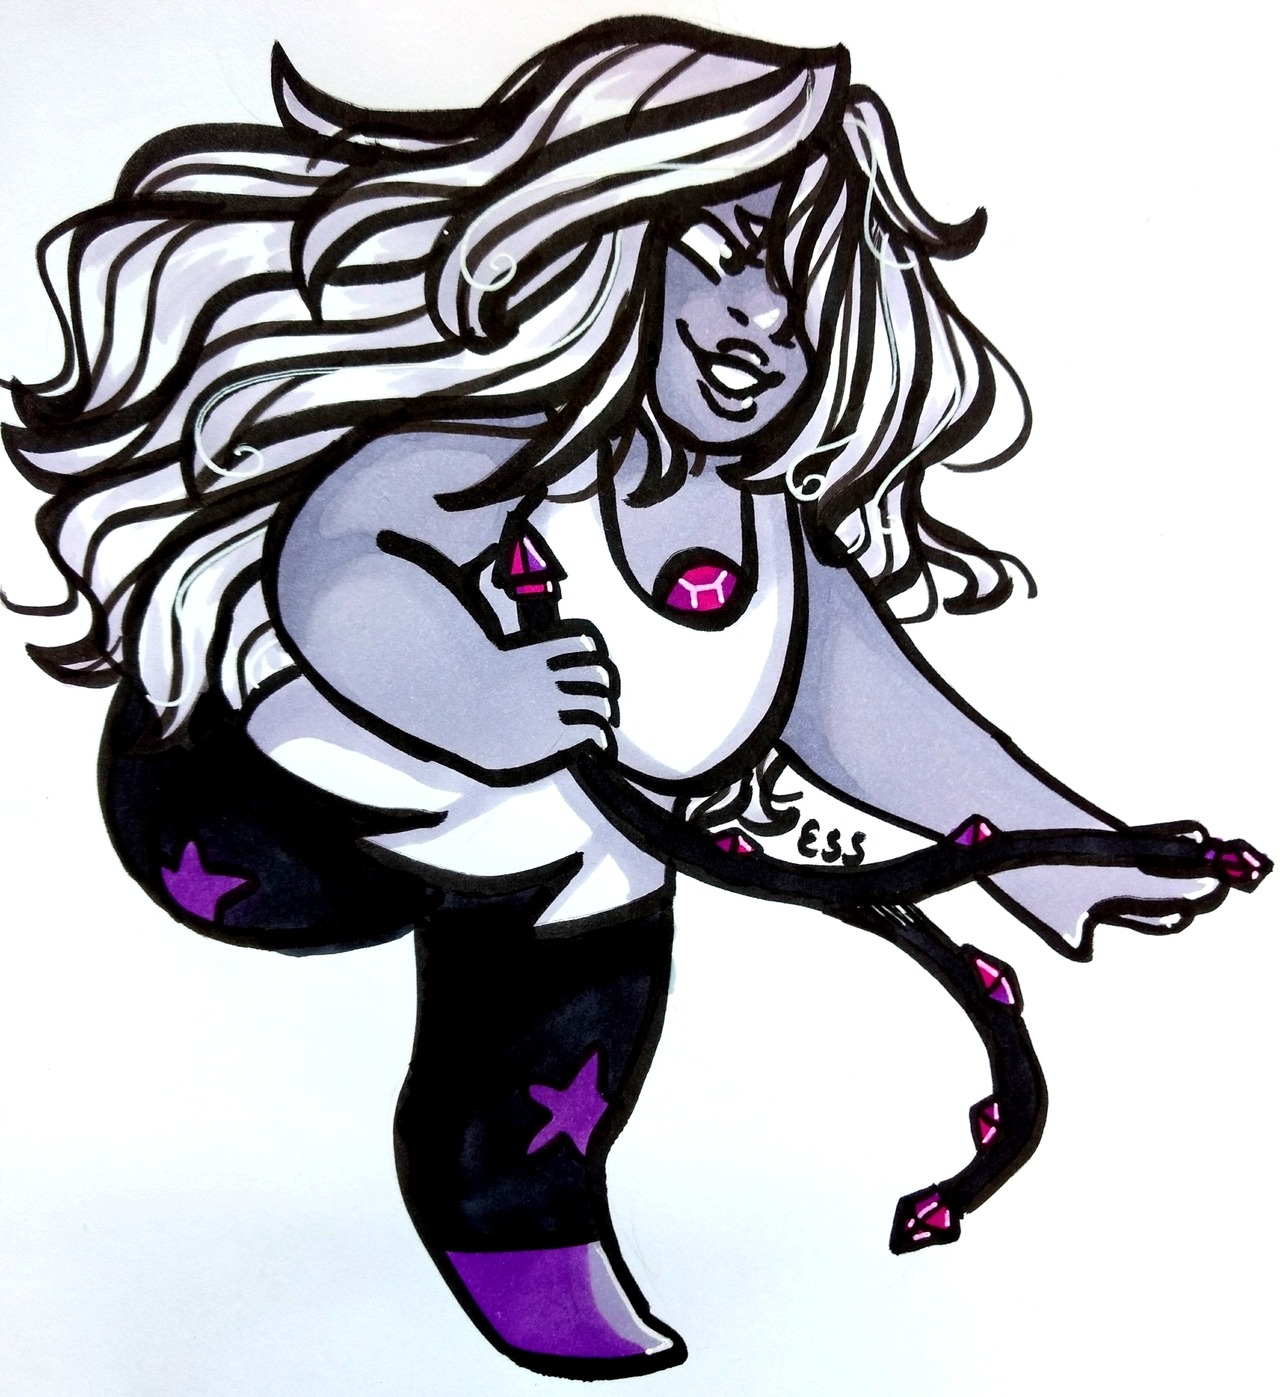 I haven’t drawn amethyst in a while but I like how she turned out